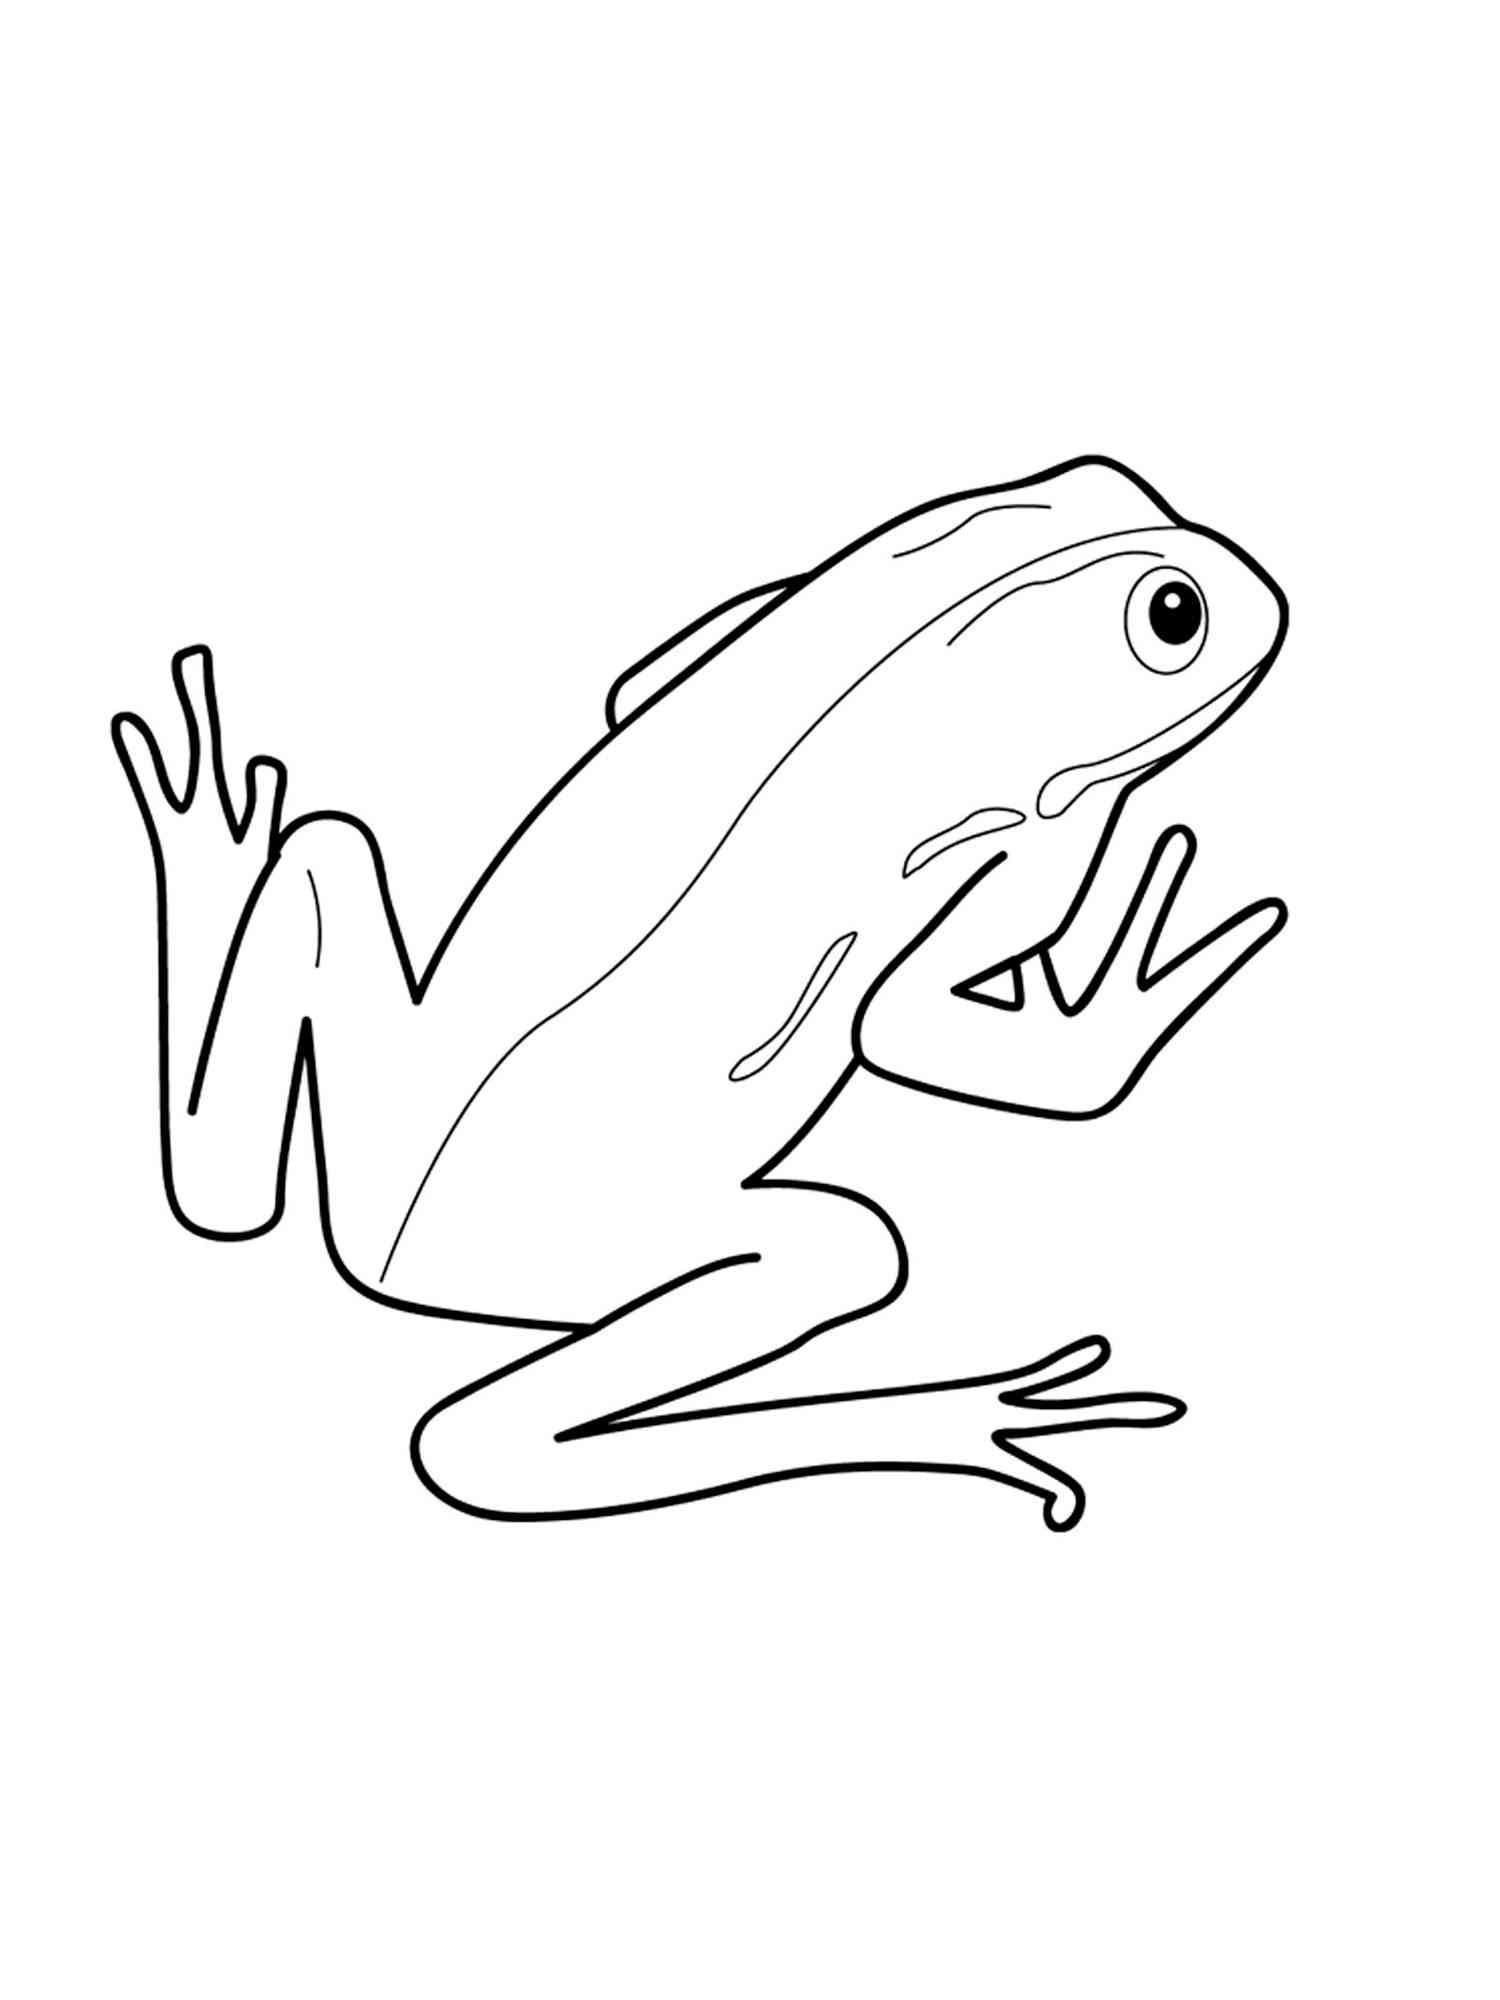 Simple Amphibian coloring page